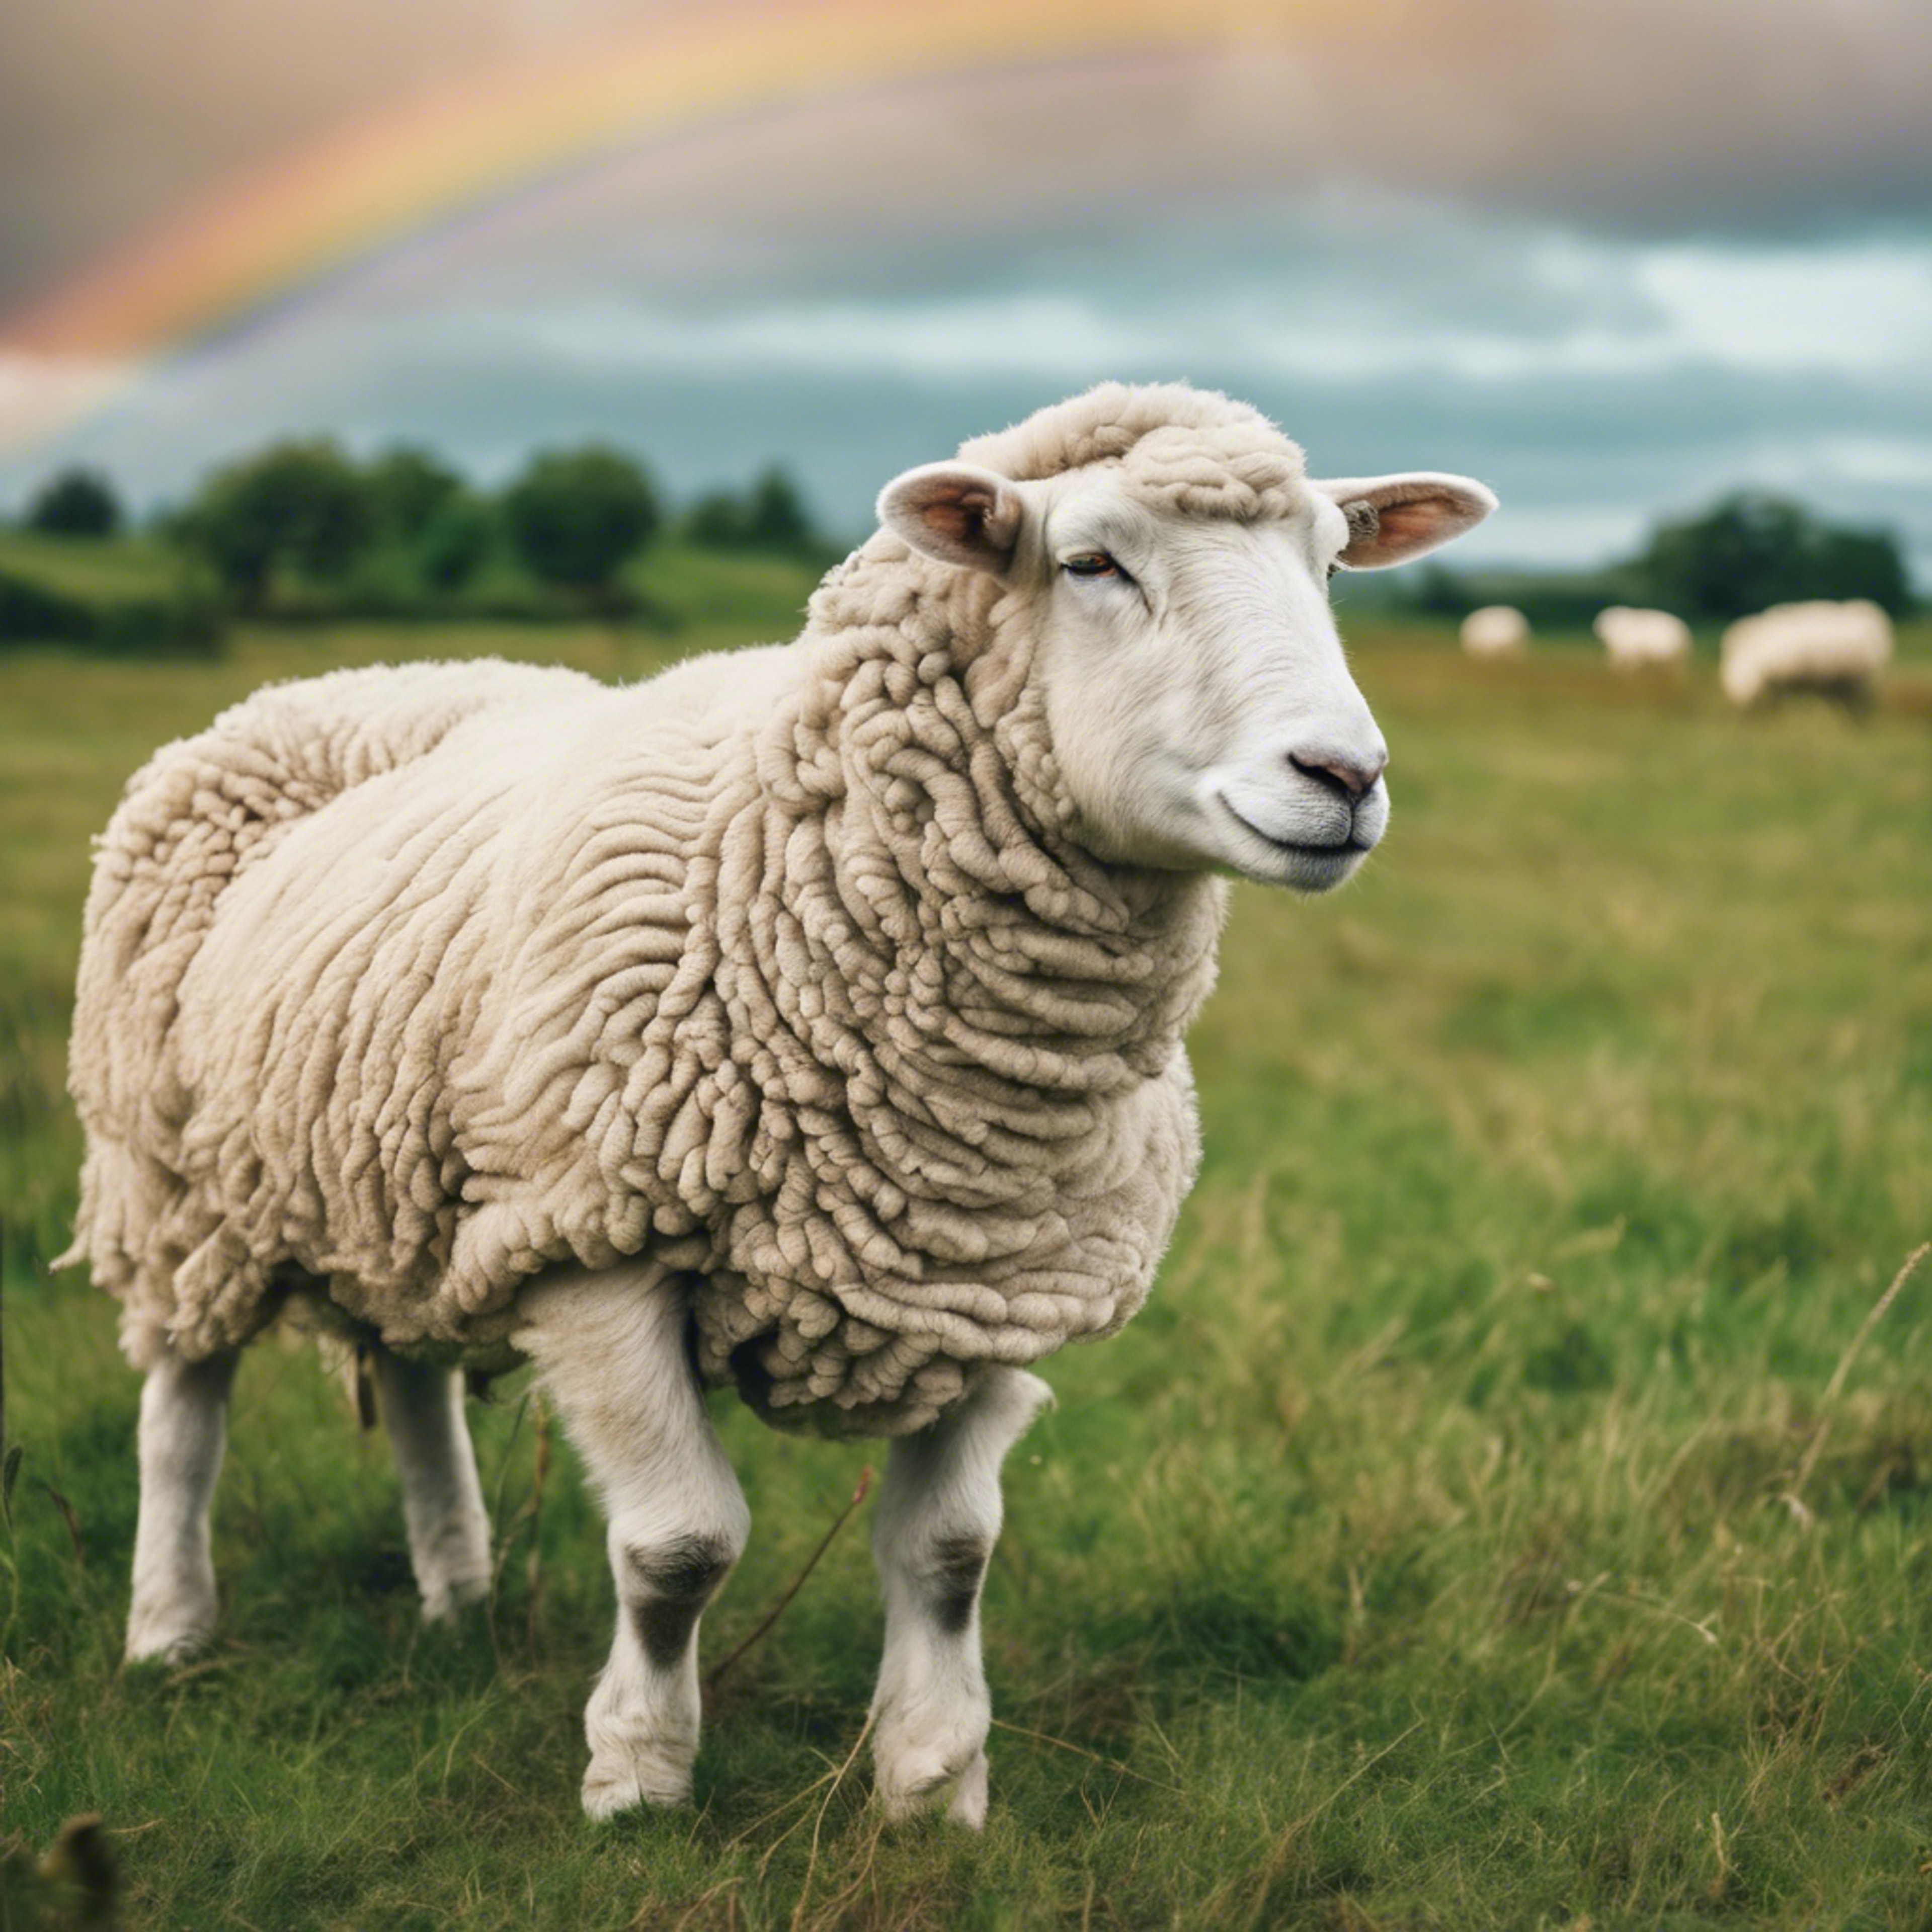 A beautiful open field of grass with puffy white cloud sheep that create rainbow trails as they bound joyfully around. Ფონი[bc005b864b354d3896db]